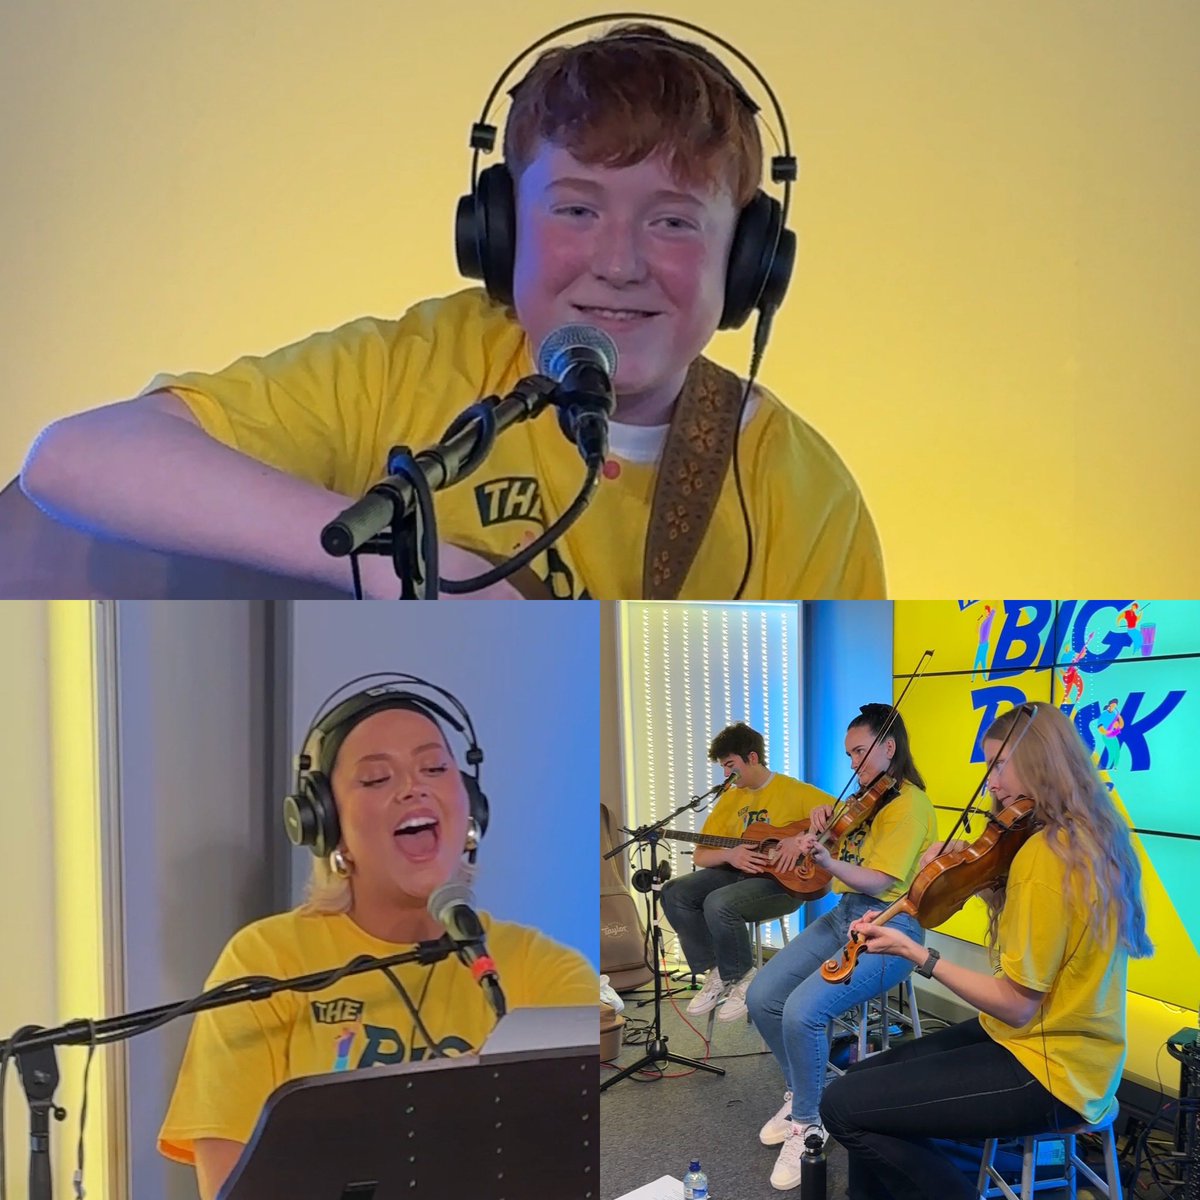 Our live Buskers on with @LaoisDeCantalun today 💛🎶 They busked our playlist and blew everyone away! All for the #BigBusk for @FocusIreland in the fight to end homelessness Donate 📲 Revolut App